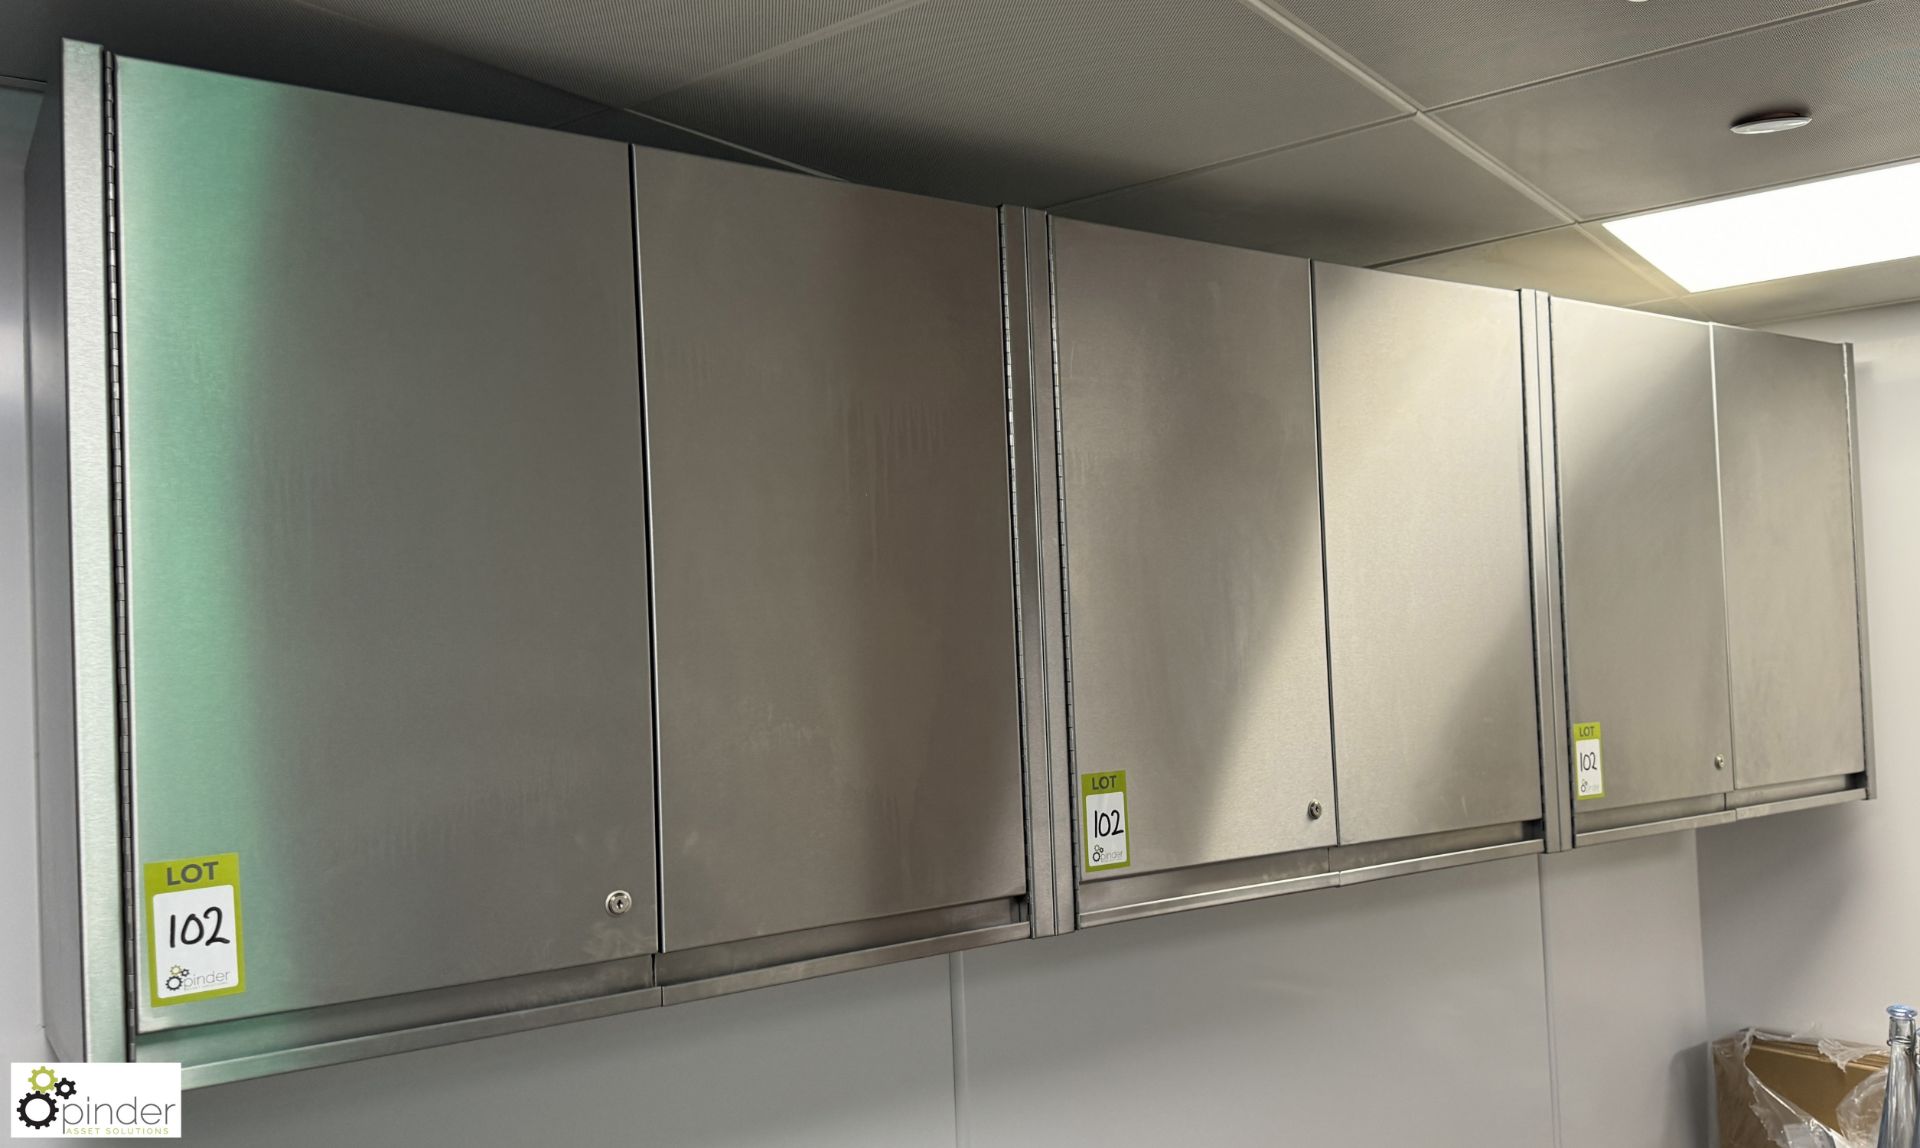 3 stainless steel wall mounted Cabinets, 900mm x 350mm x 800mm (location in building – basement - Image 2 of 4